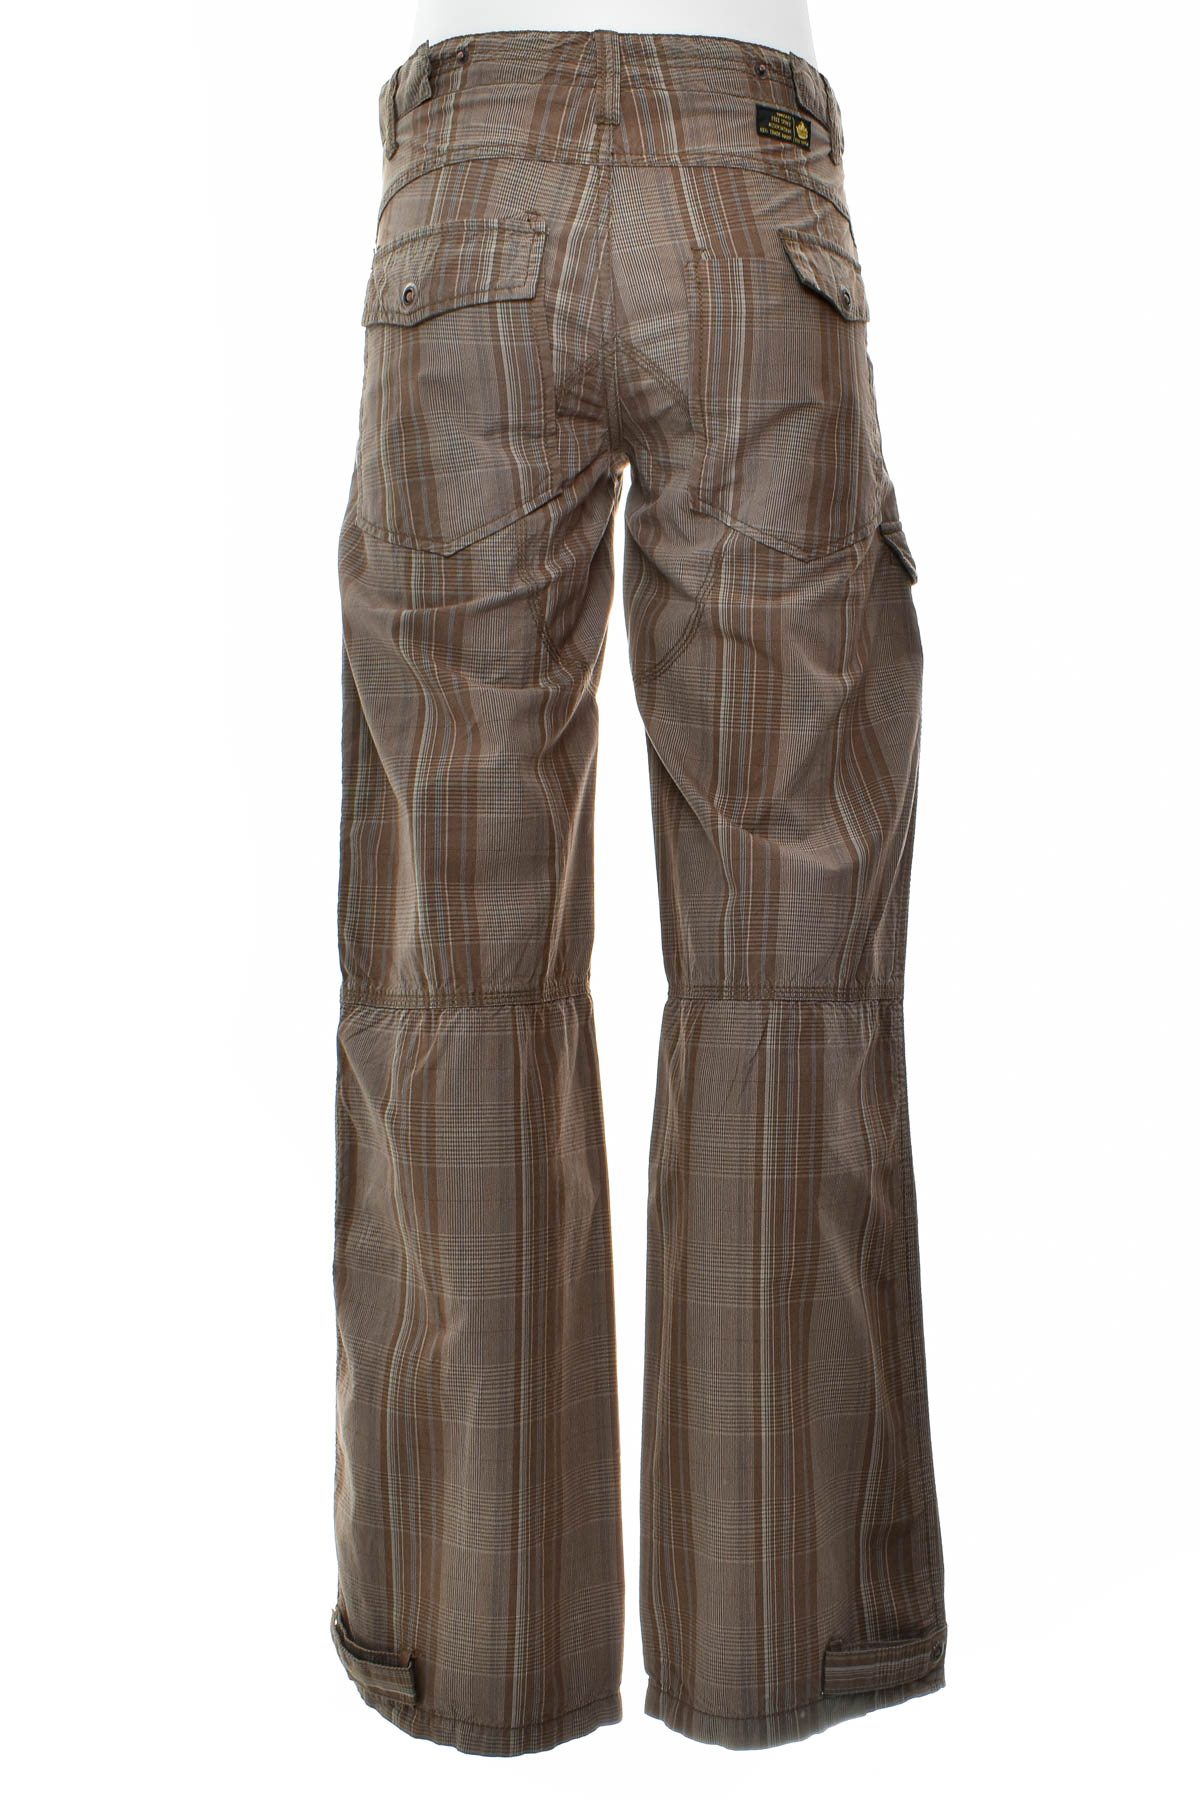 Trousers for boy - RagsCo - 1